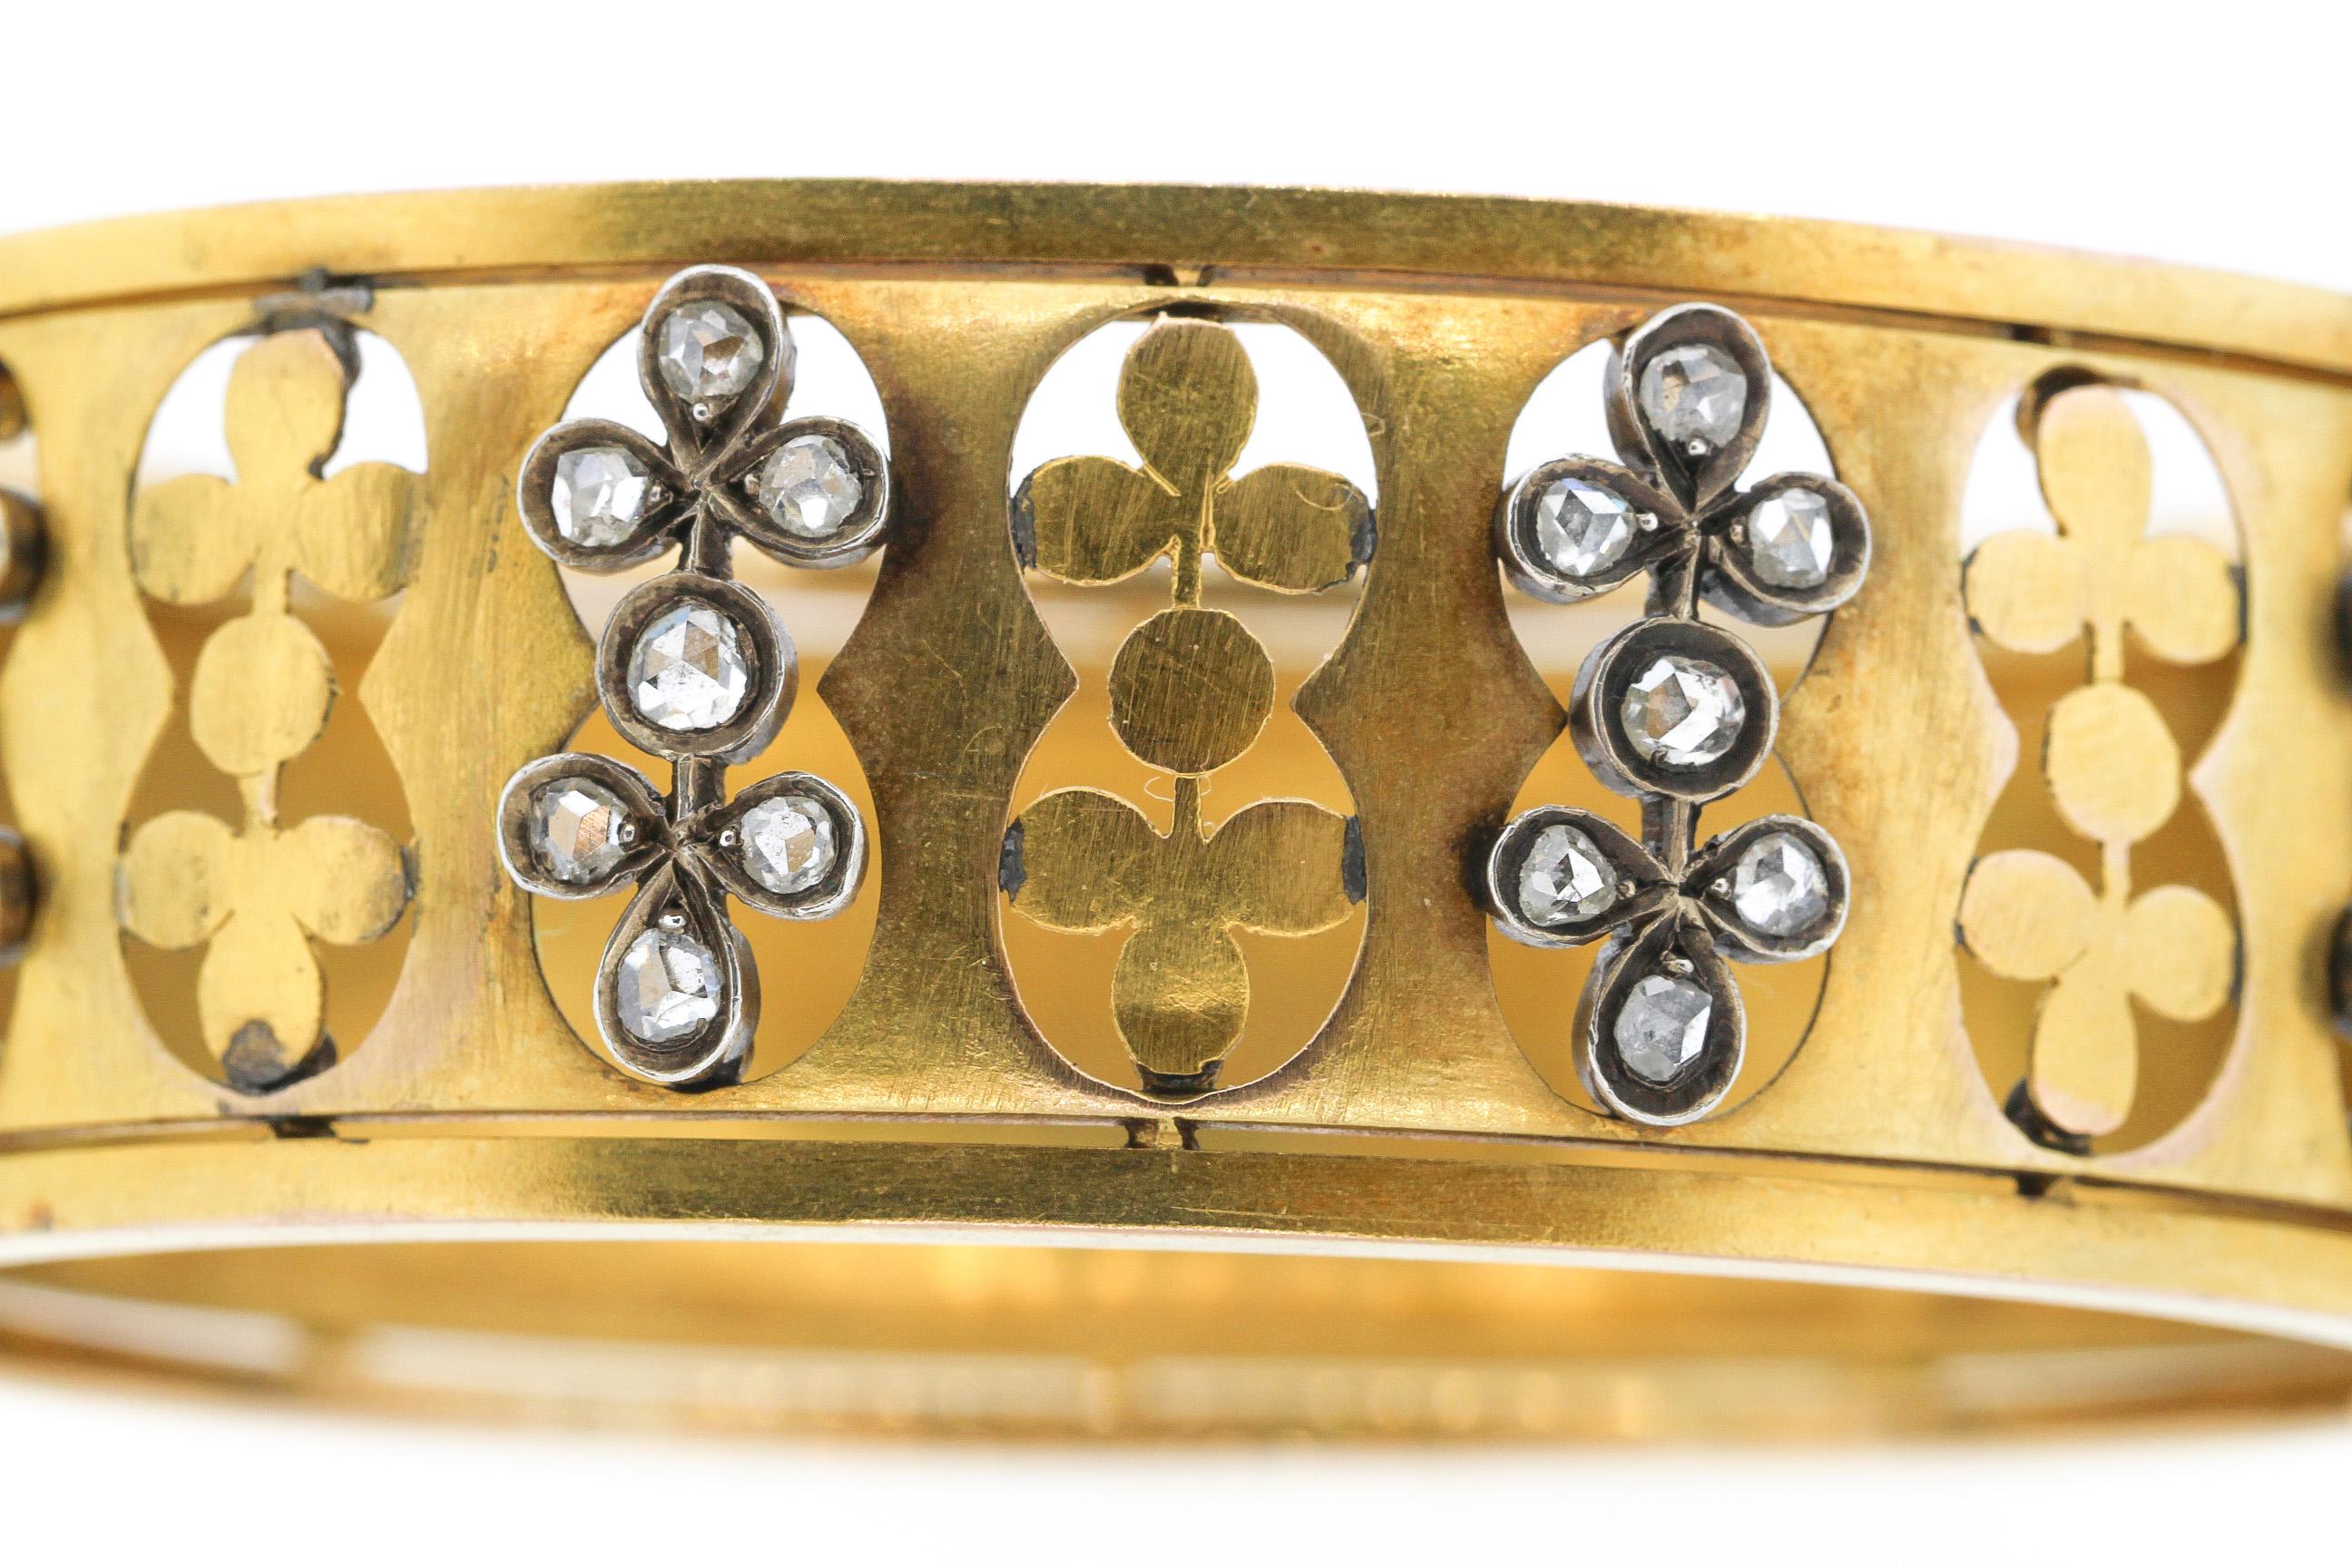 A beautiful antique Victorian 18k yellow gold bracelet set with rosecut diamonds, circa 1880. The 28 rosecut diamonds are set in silver topped gold creating a contrast in colors. There are cutout clover designs alternating with the diamond design.